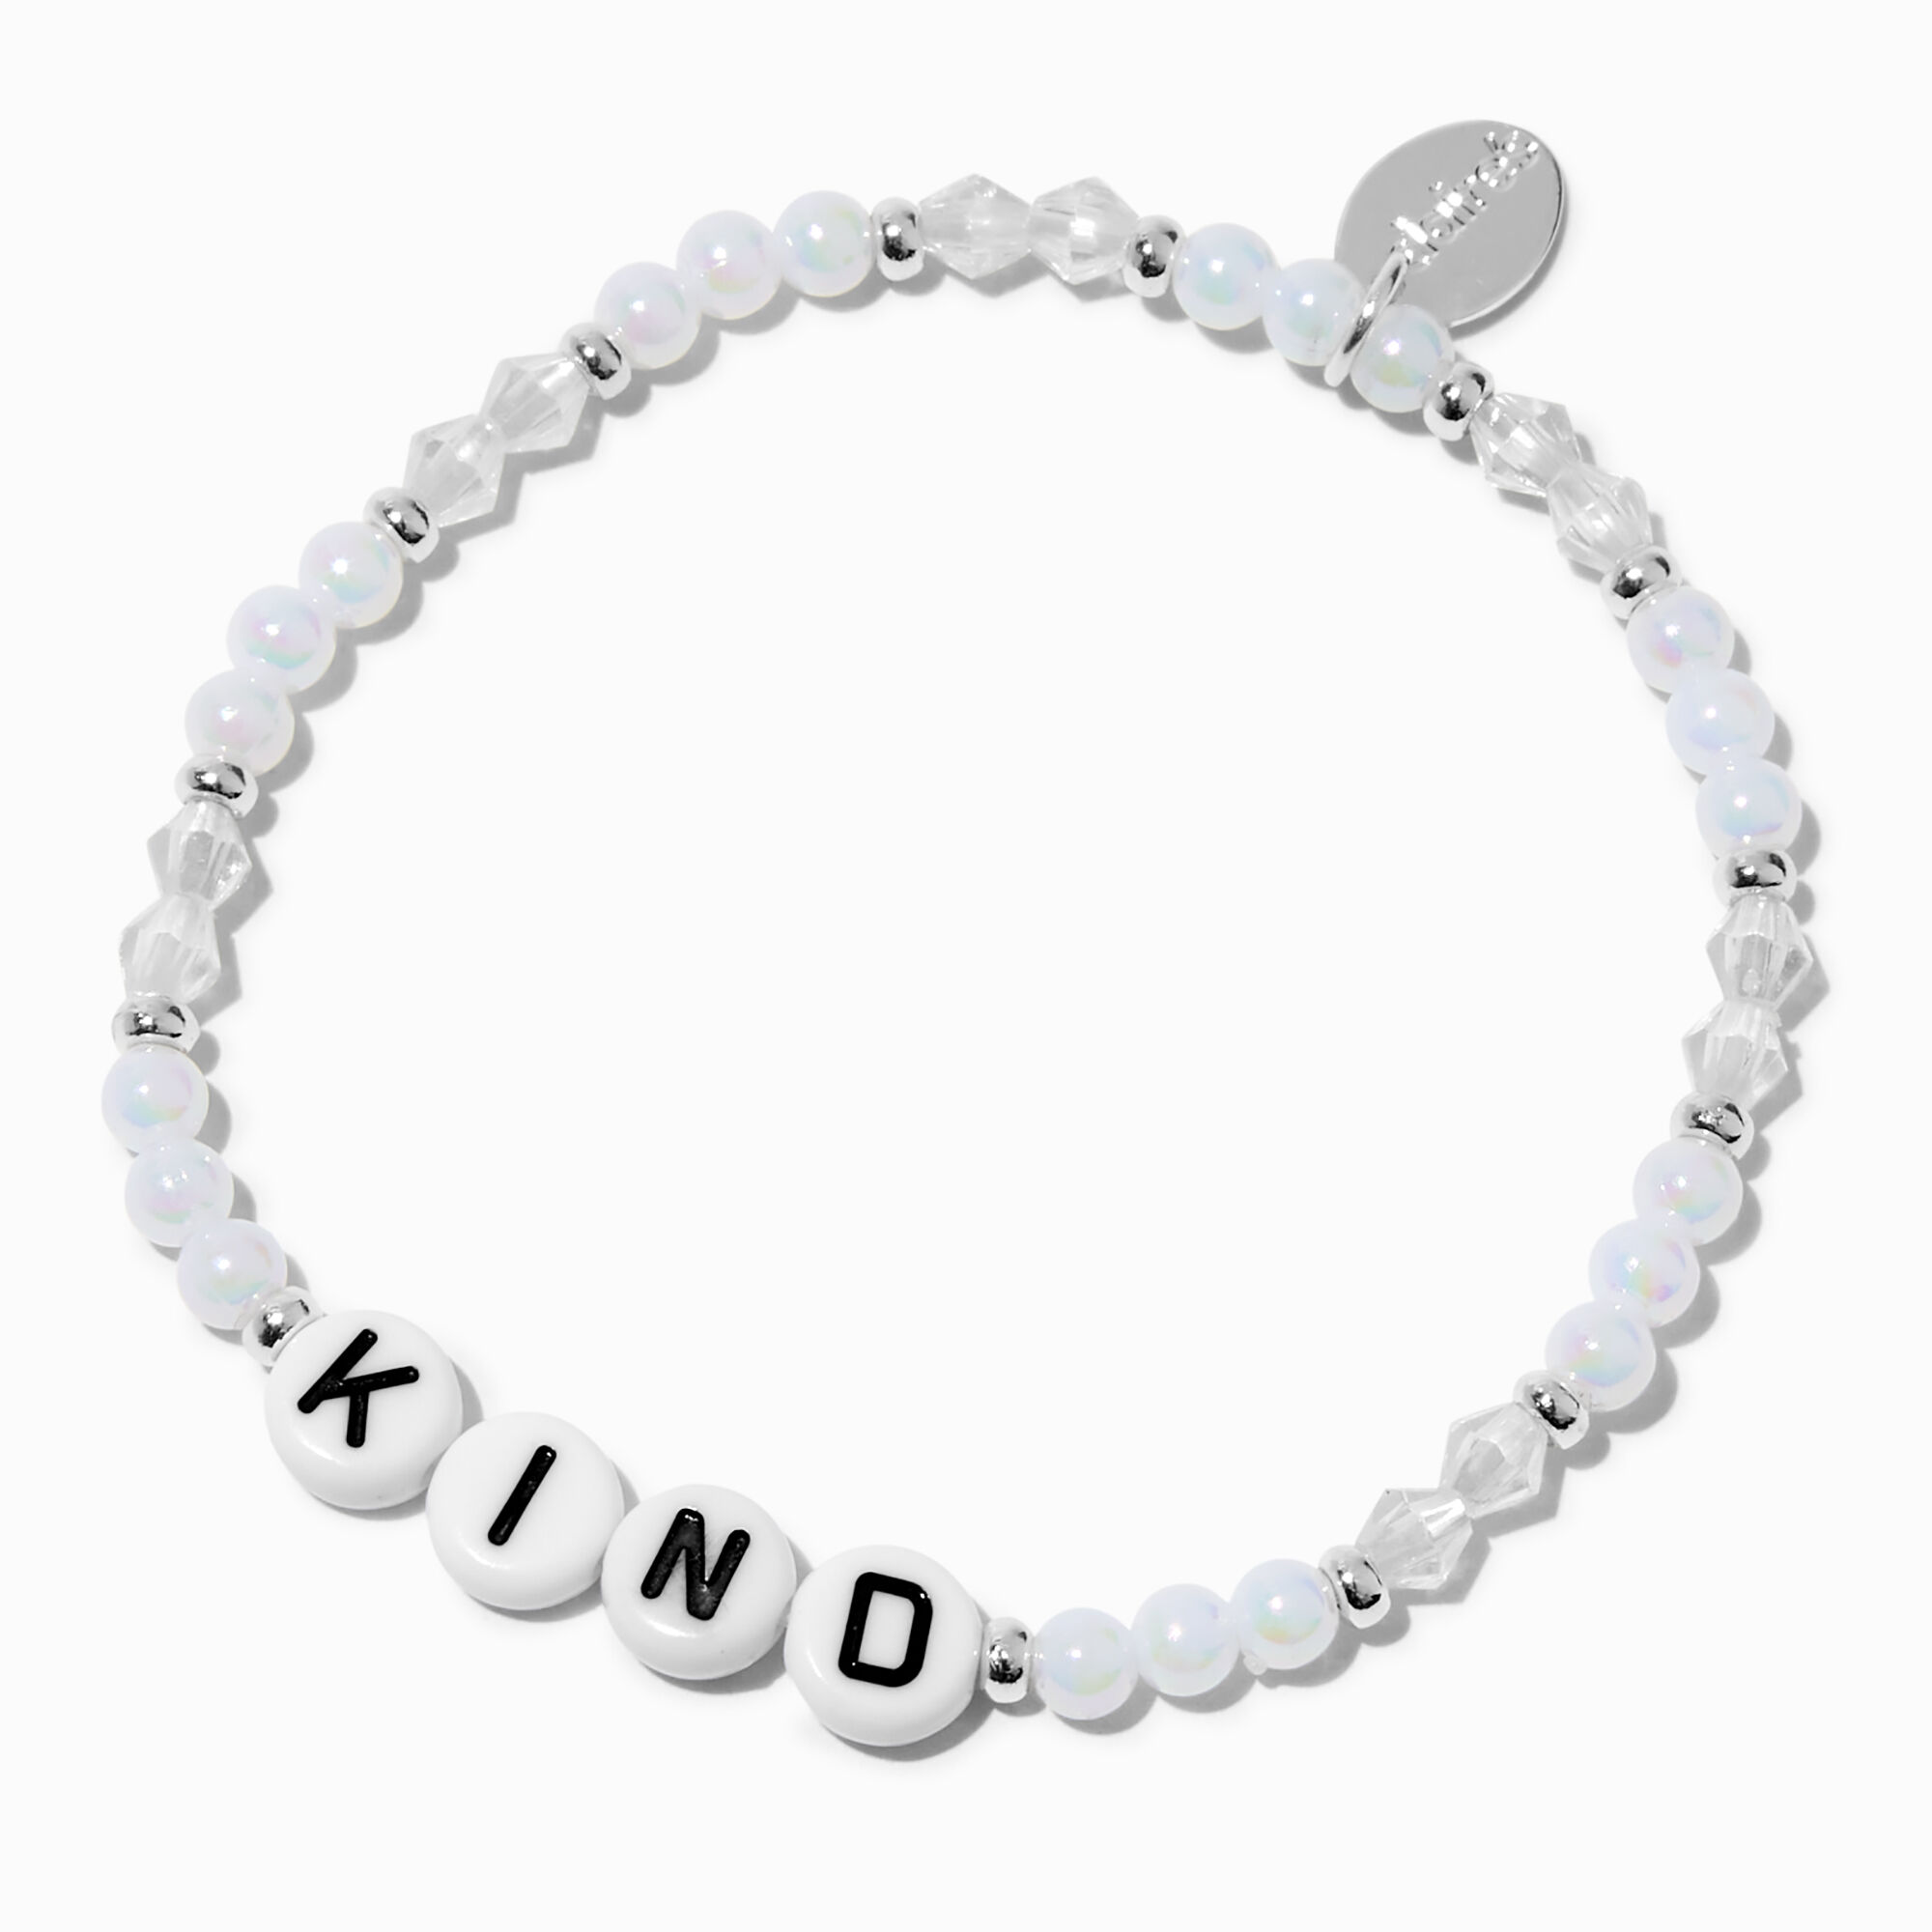 View Claires kind Beaded Stretch Bracelet White information